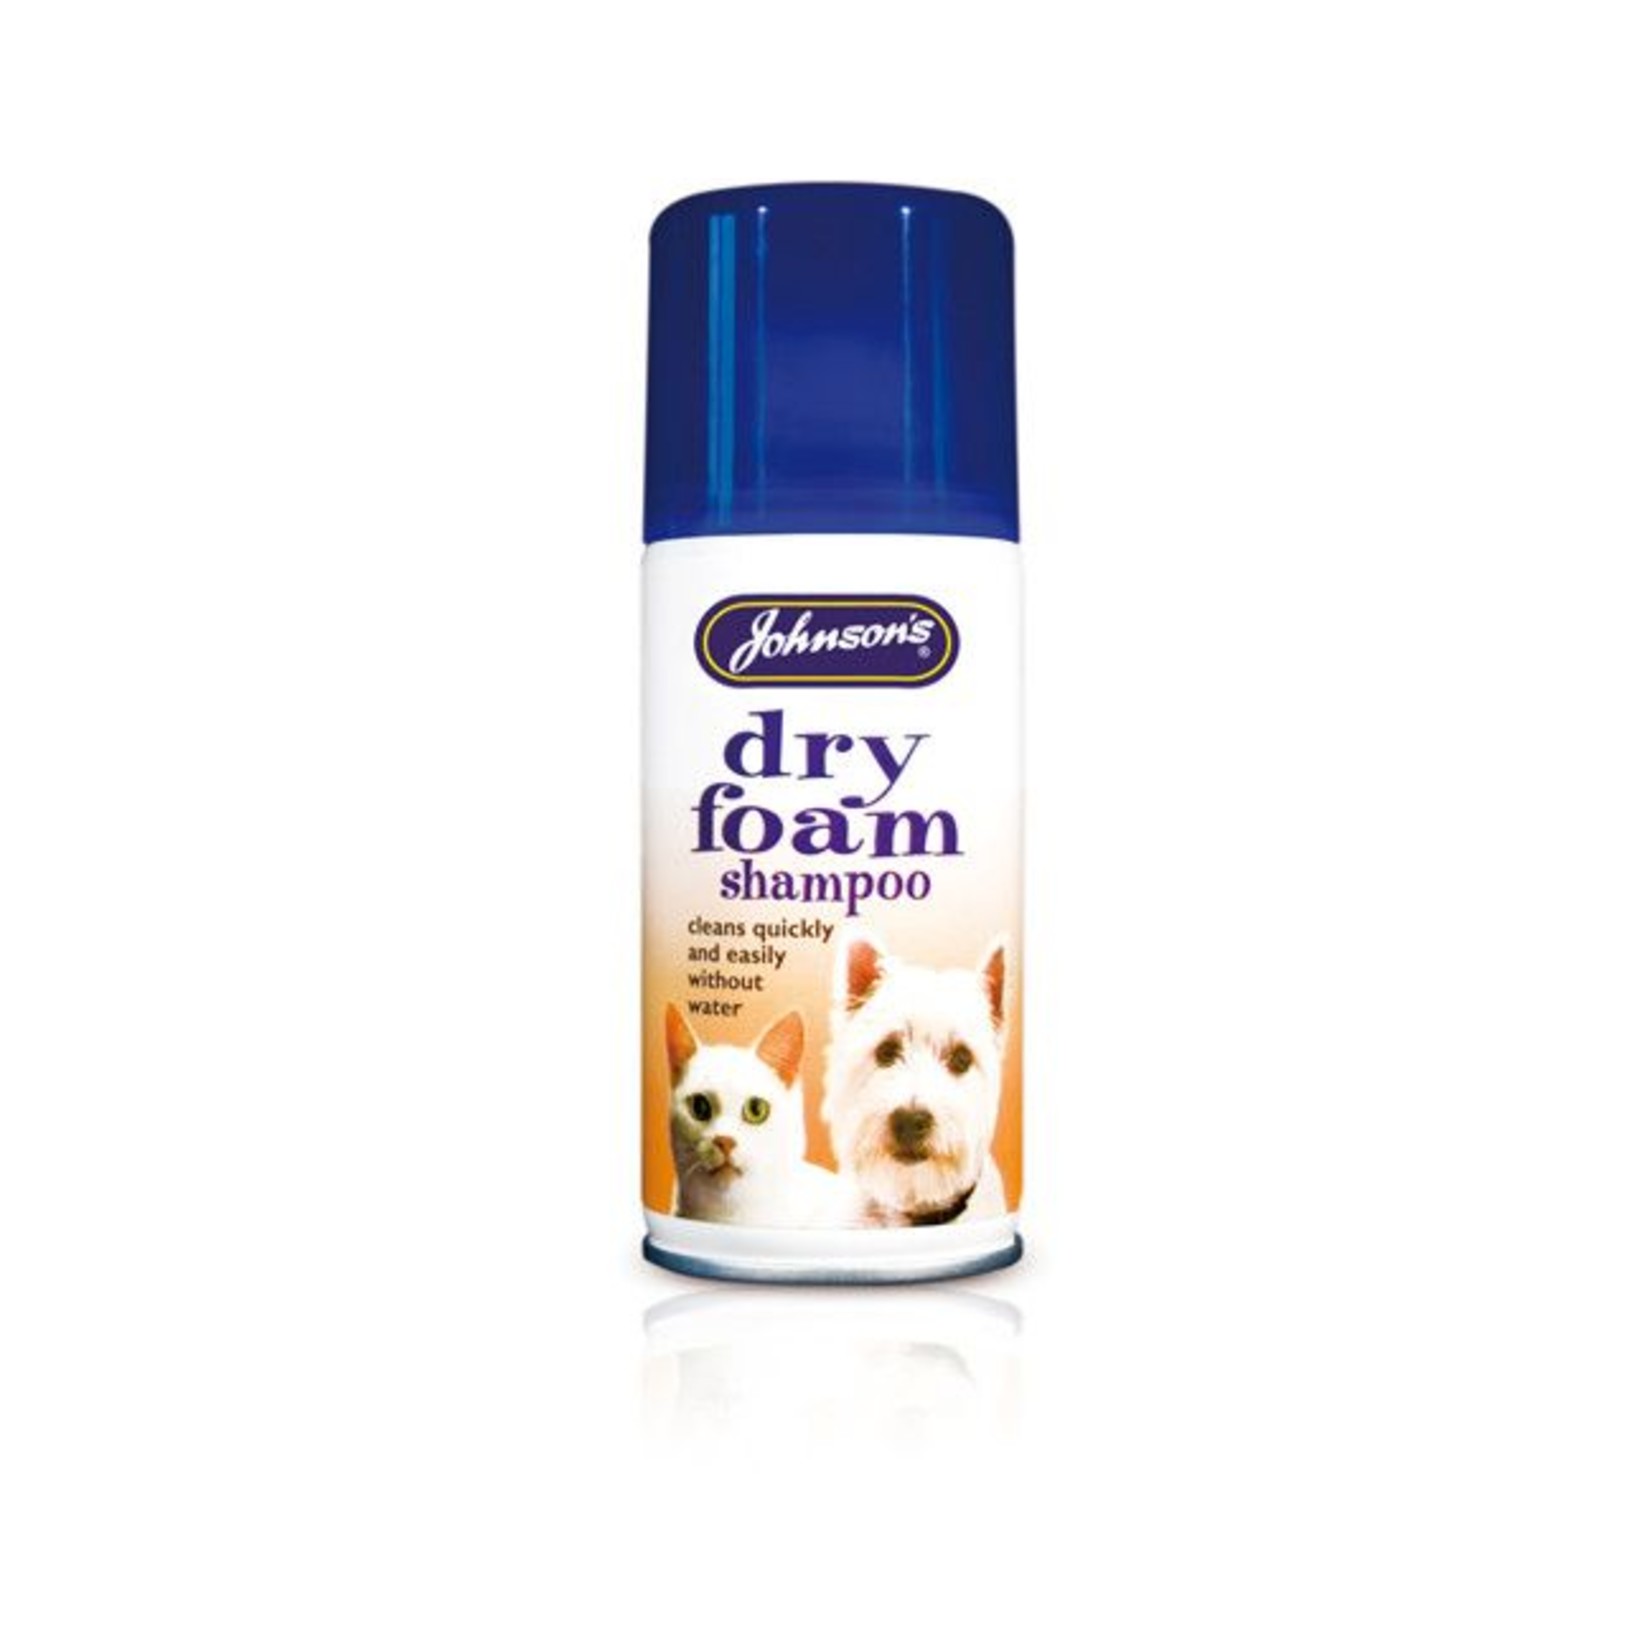 Johnson's Veterinary Dry- Foam Shampoo Spray for Cats & Dogs, cleans without water, 150ml